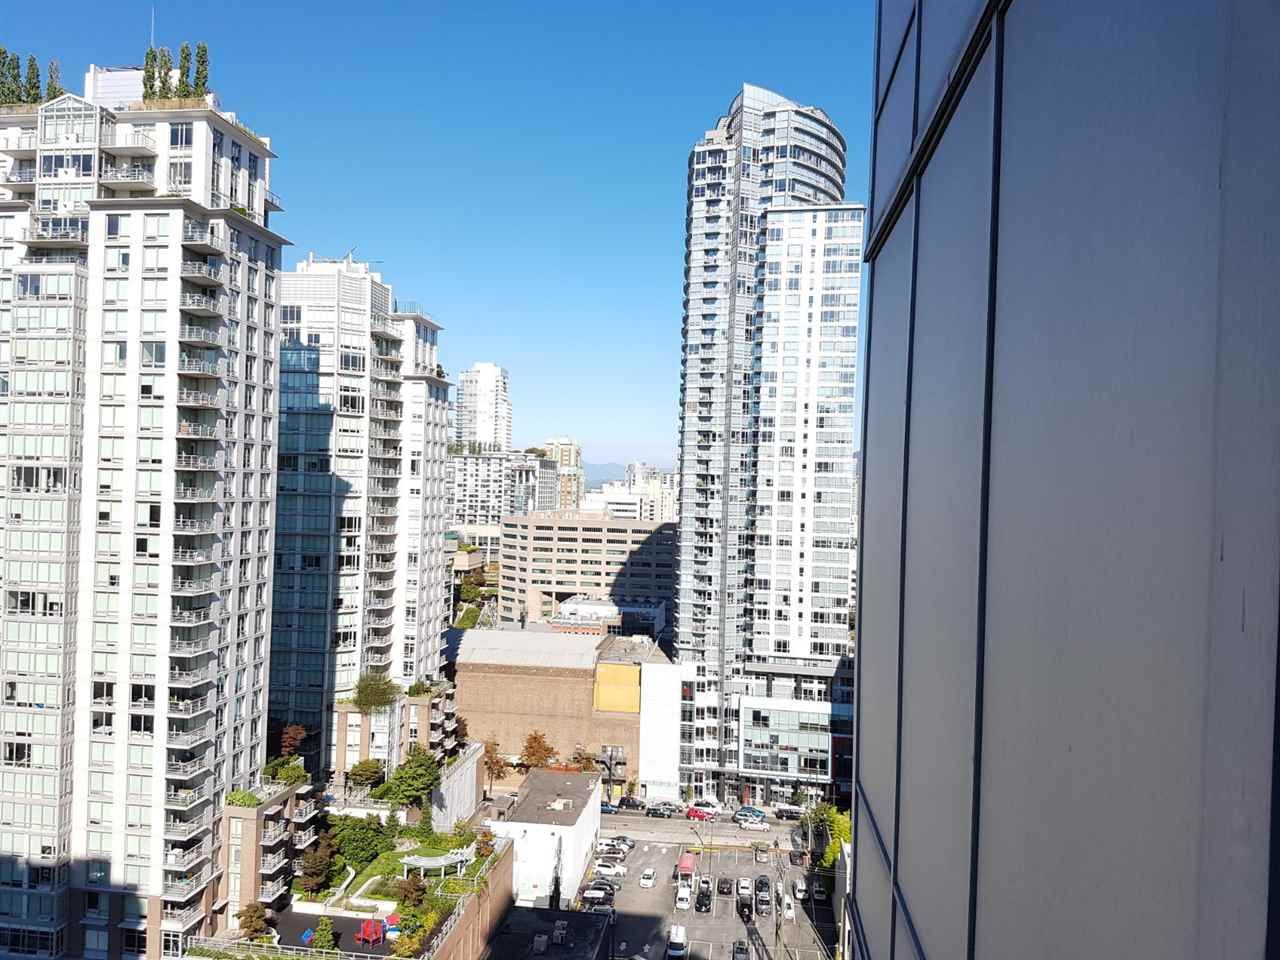 Main Photo: 2208 833 HOMER STREET in Vancouver: Downtown VW Condo for sale (Vancouver West)  : MLS®# R2200752